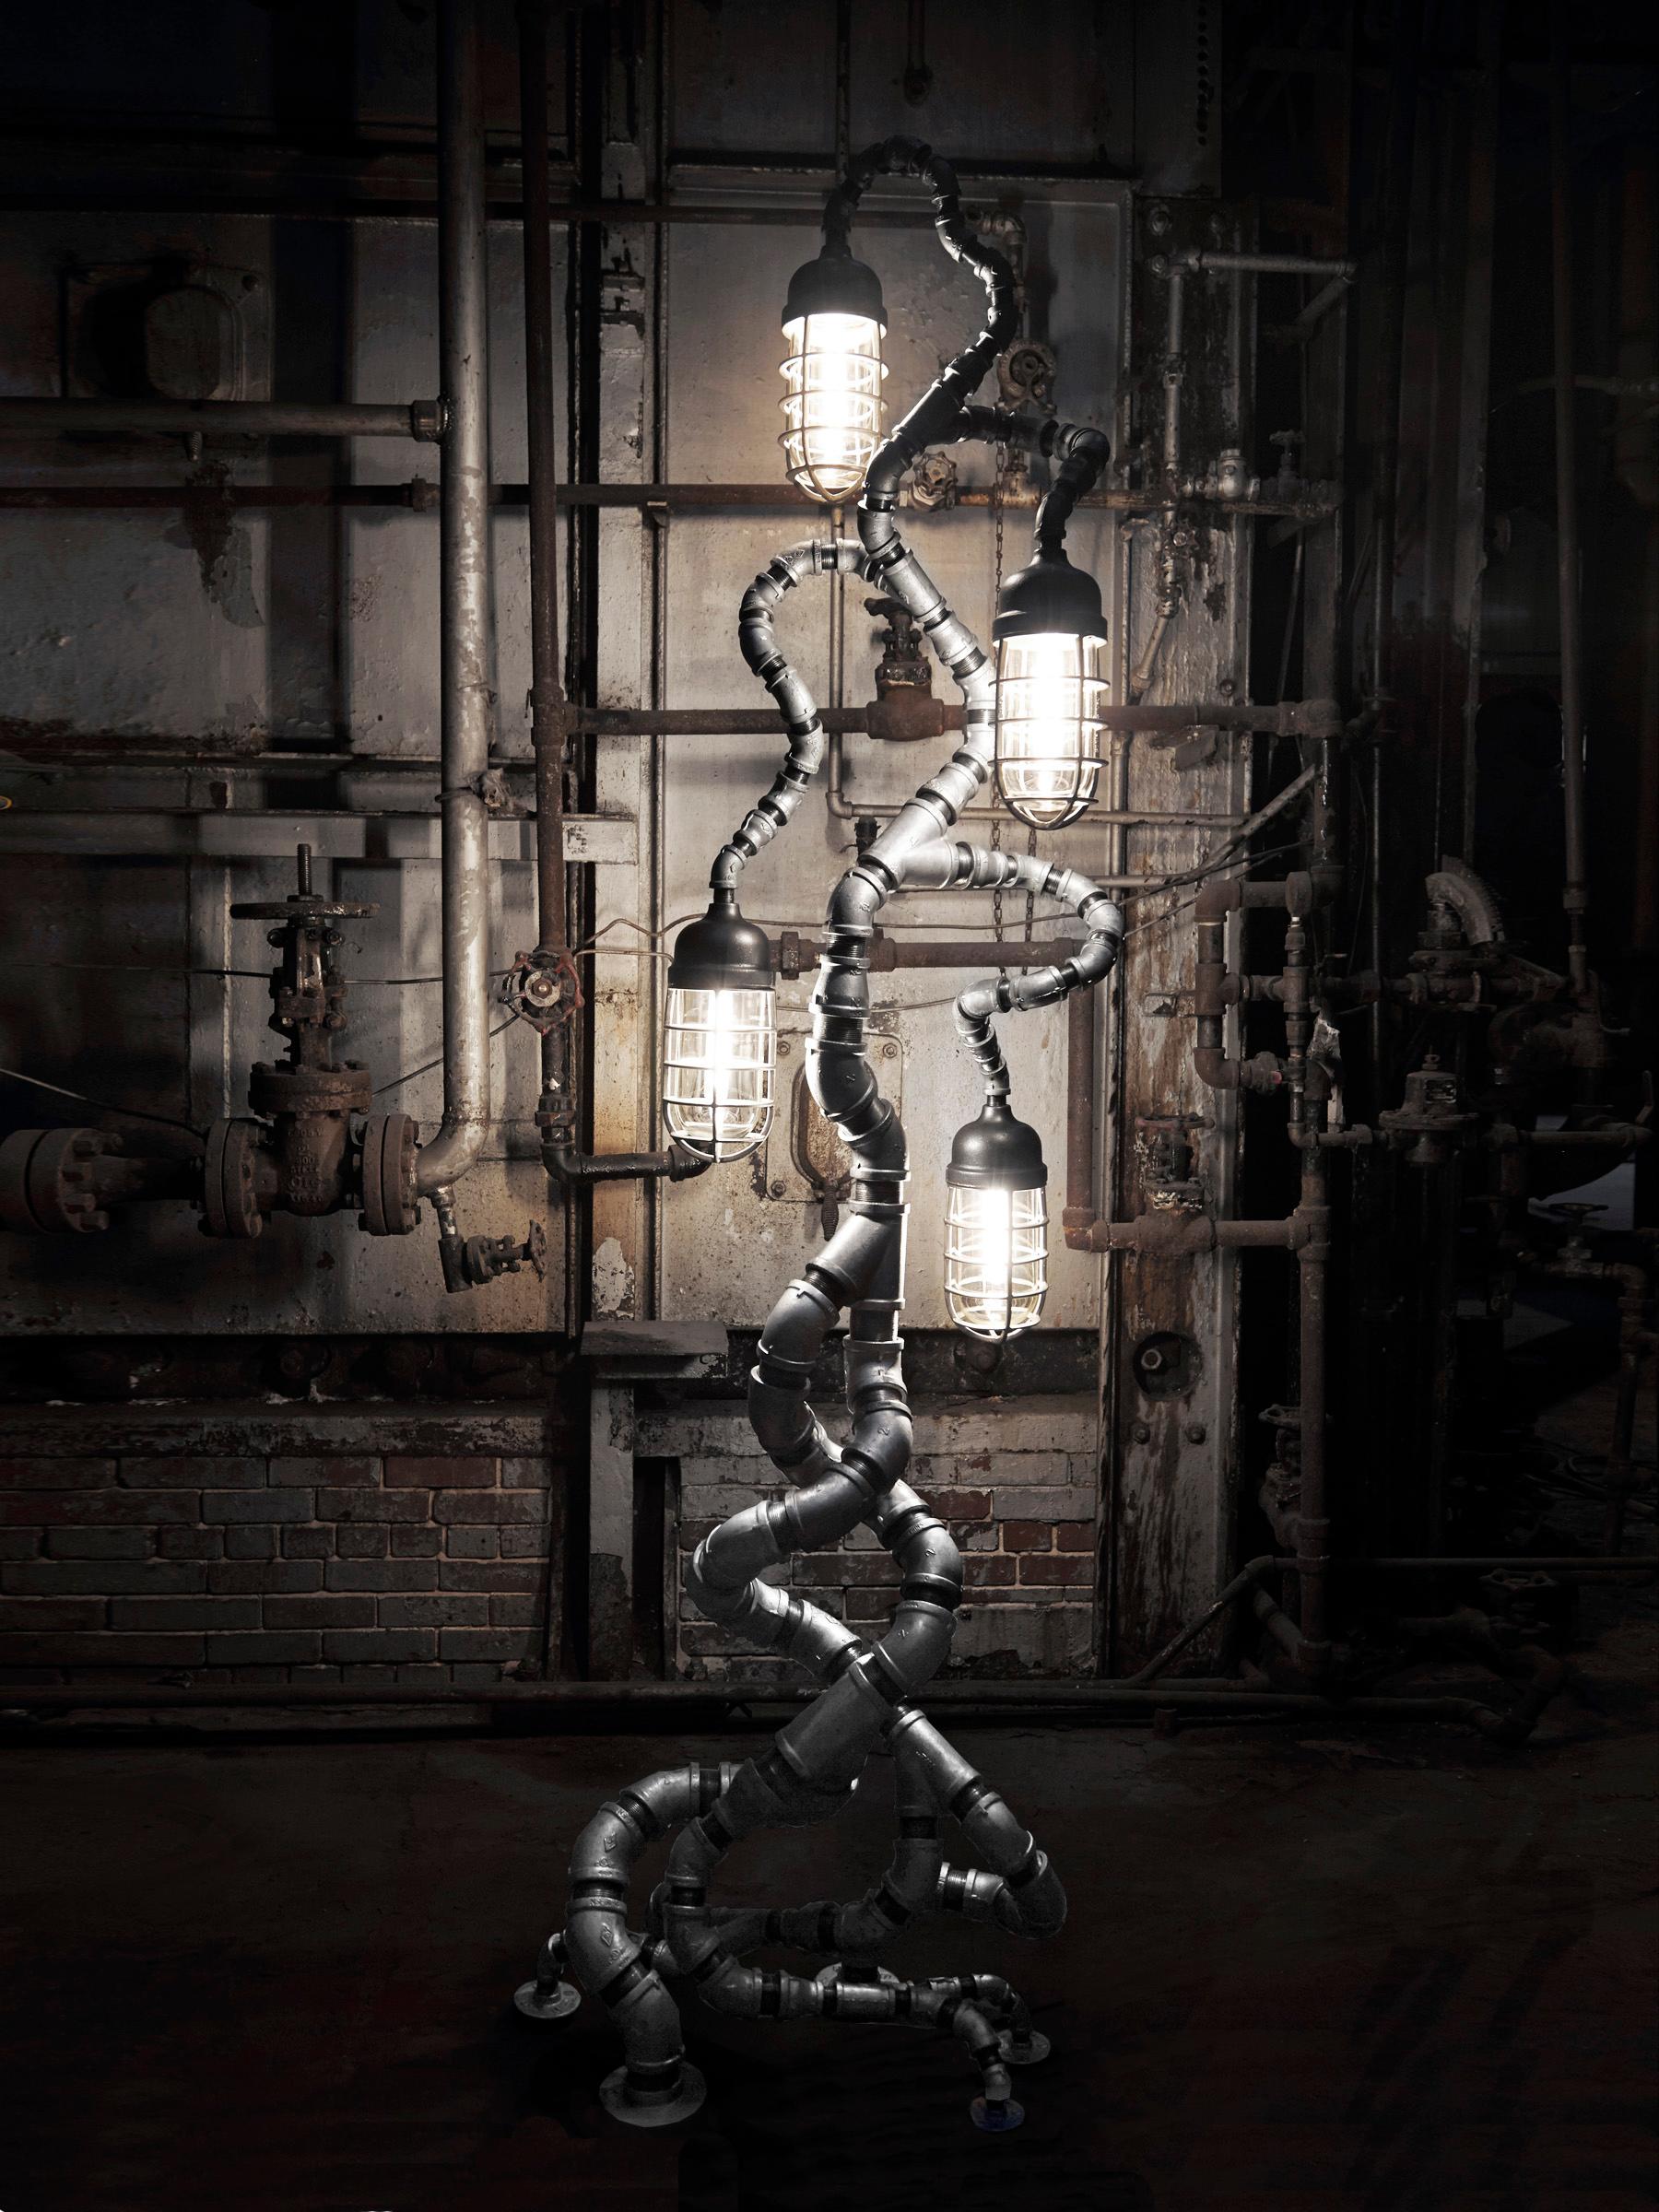 Steel Modern Industrial Floor Lamp - Industrial Decor - Crouse Hinds Industrial Light For Sale